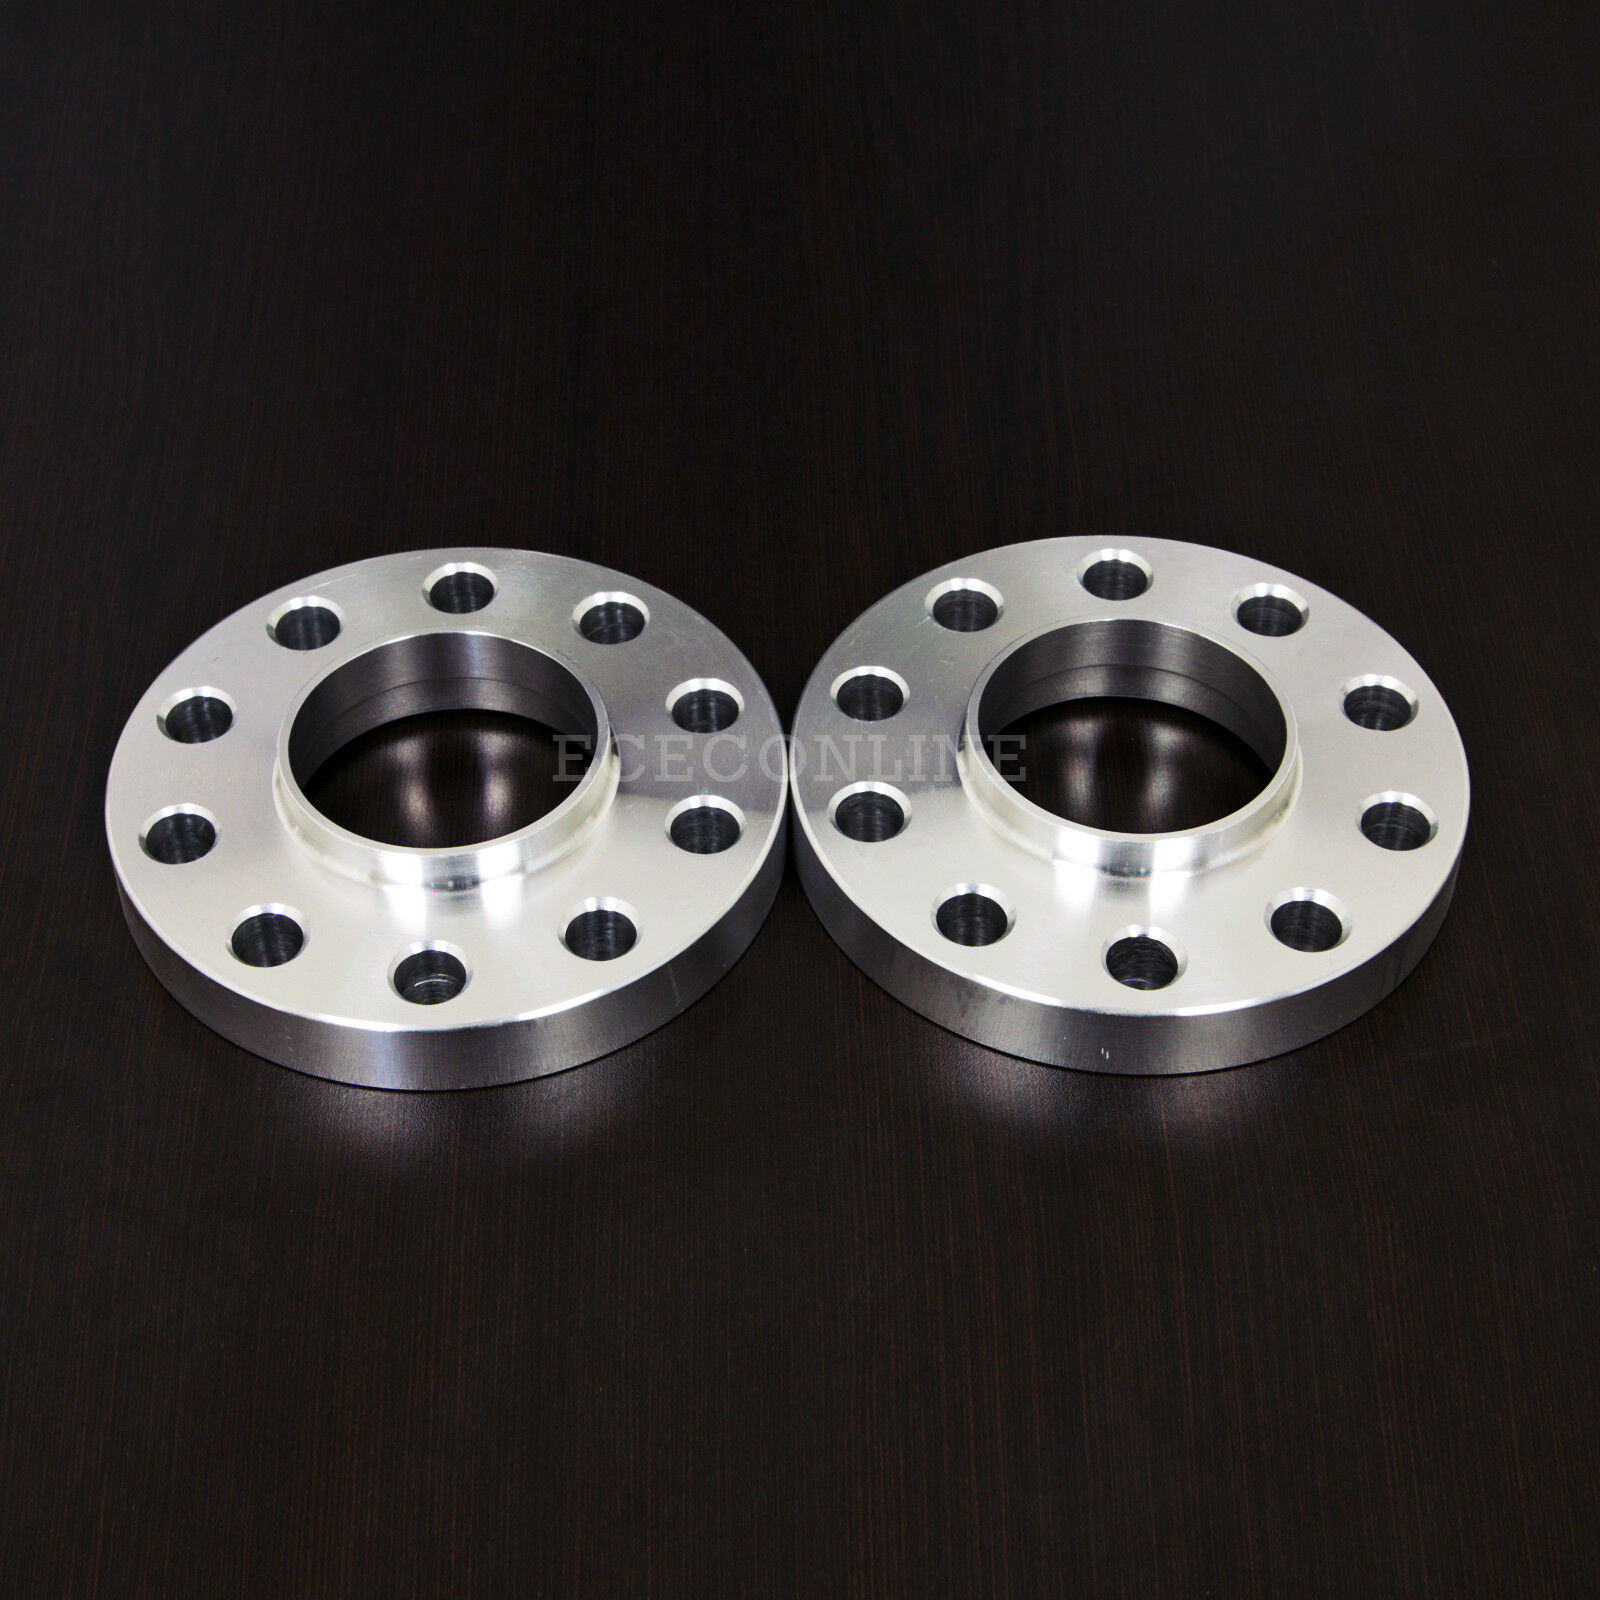 2pcs 15mm Hubcentric Wheel Spacers 5x112, 66.6 / 66.56 Bore, for Audi Mercedes